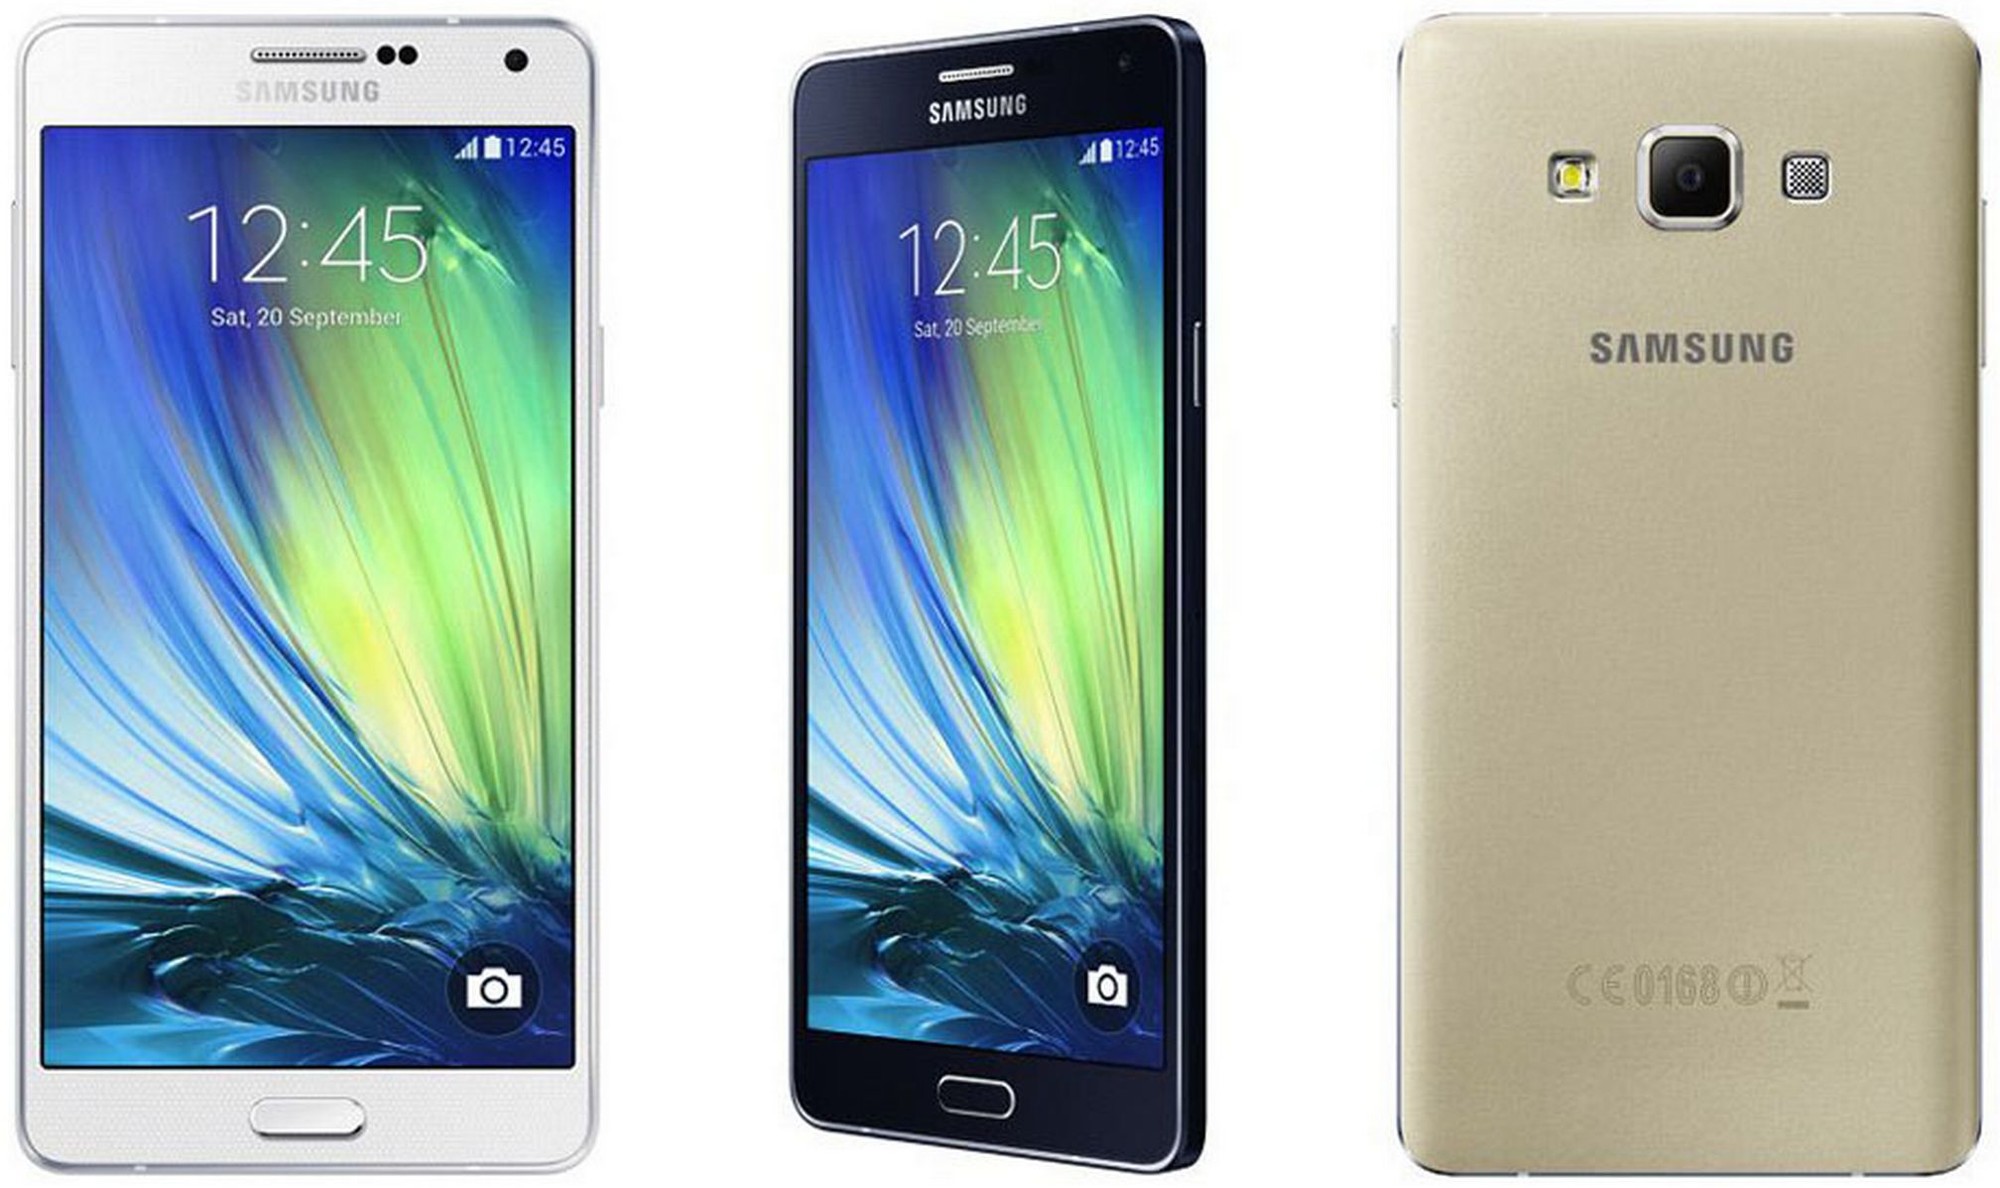 Samsung Galaxy A7 SM-A700FD - Specs and Price - Phonegg